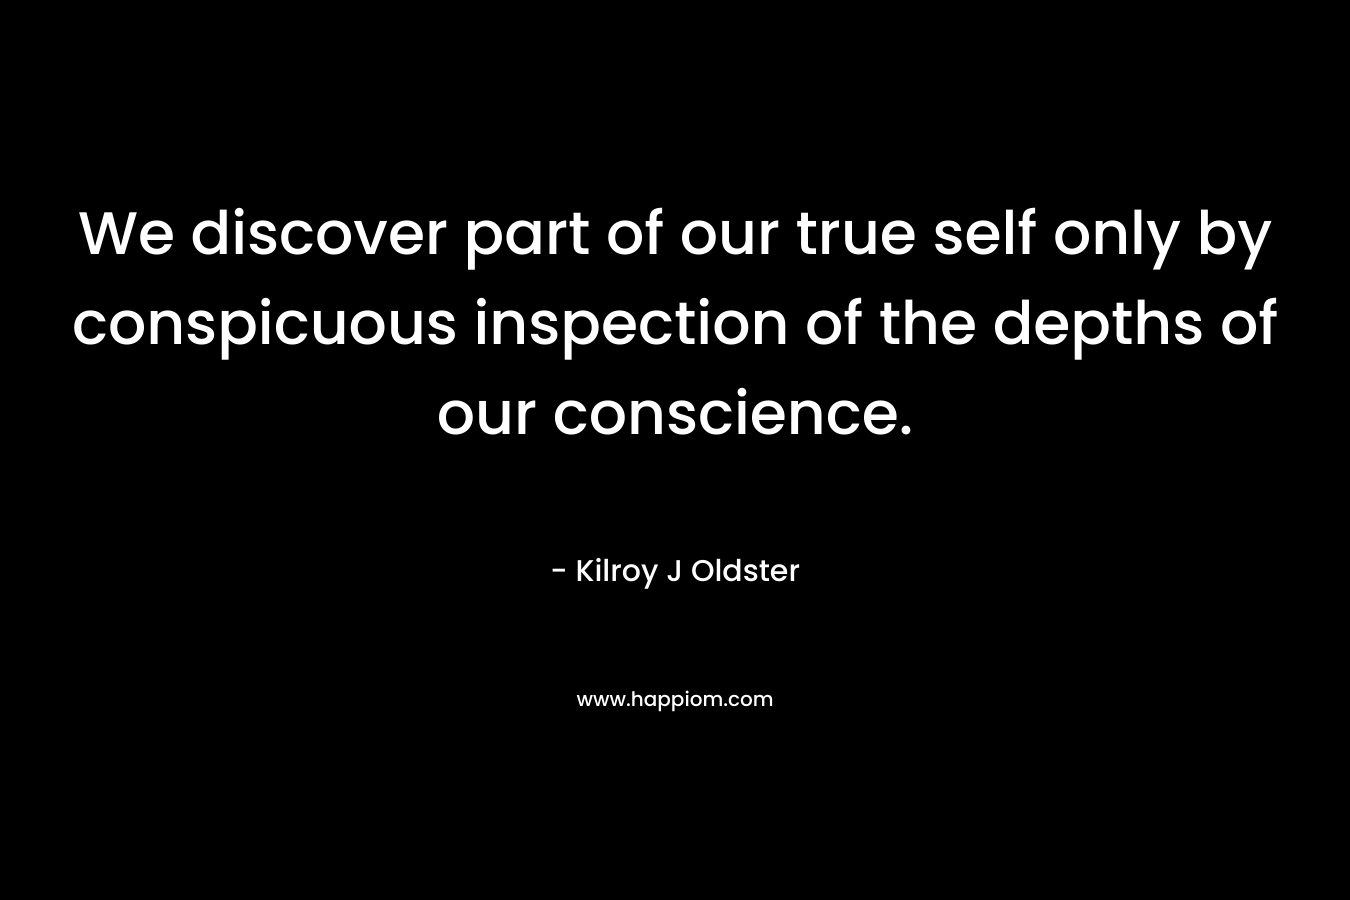 We discover part of our true self only by conspicuous inspection of the depths of our conscience.